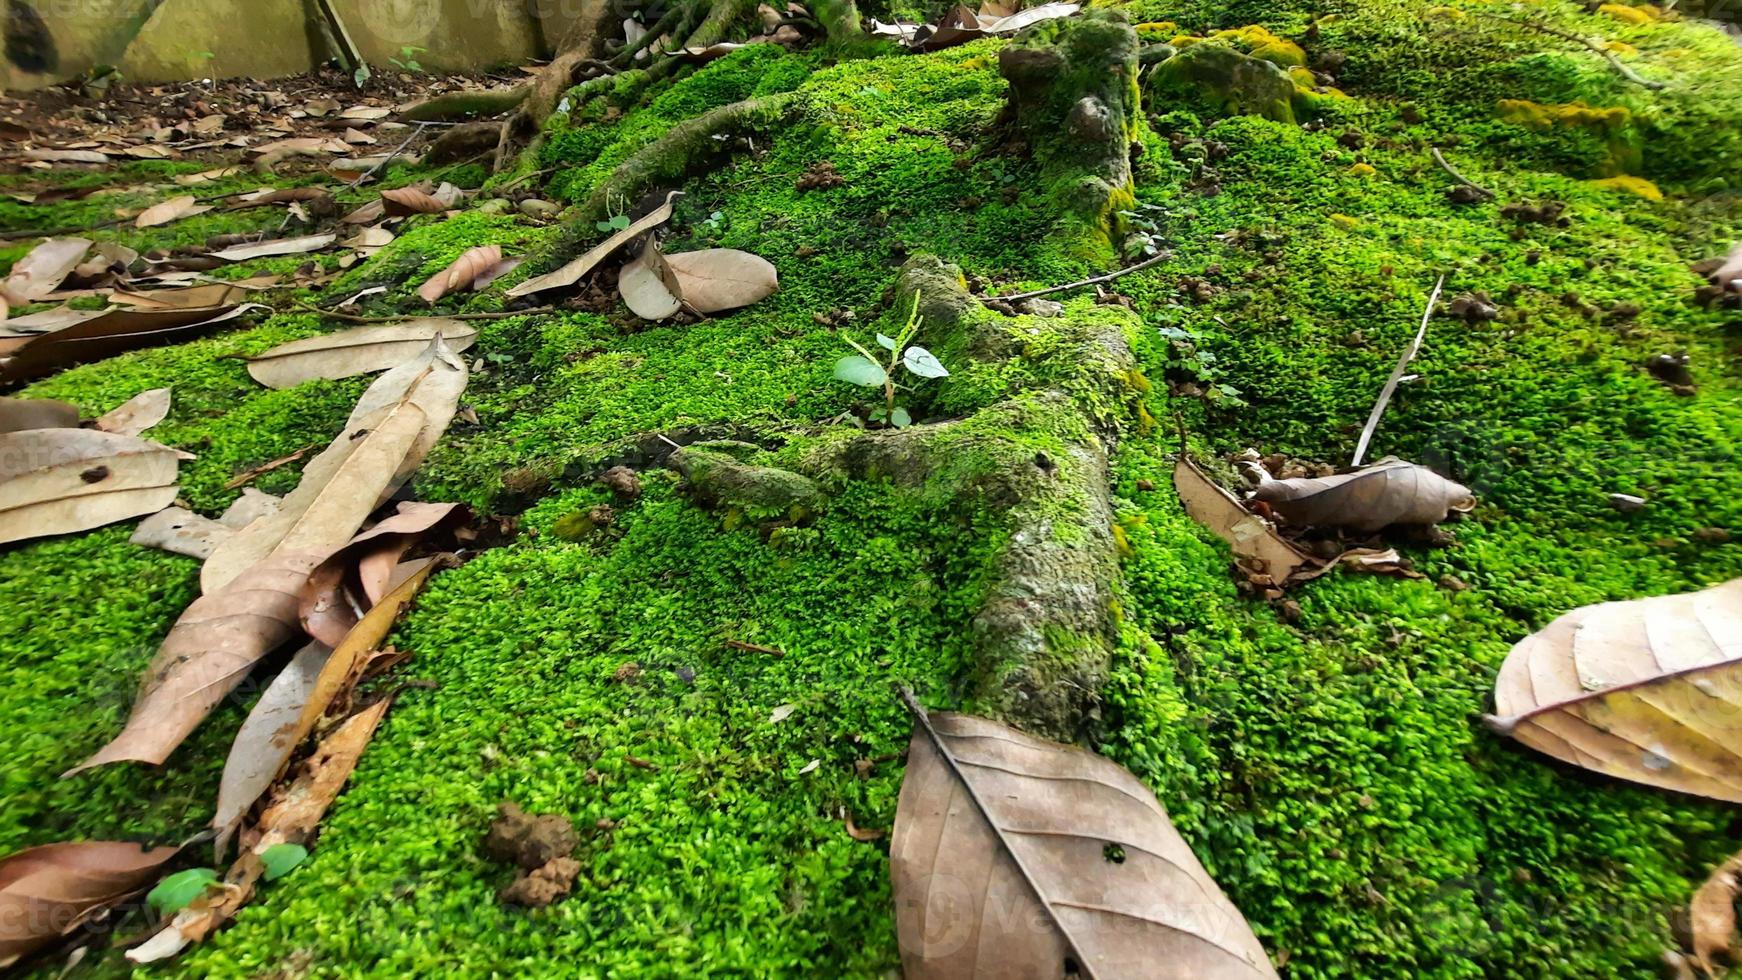 Green moss background in tropical forest 05 photo